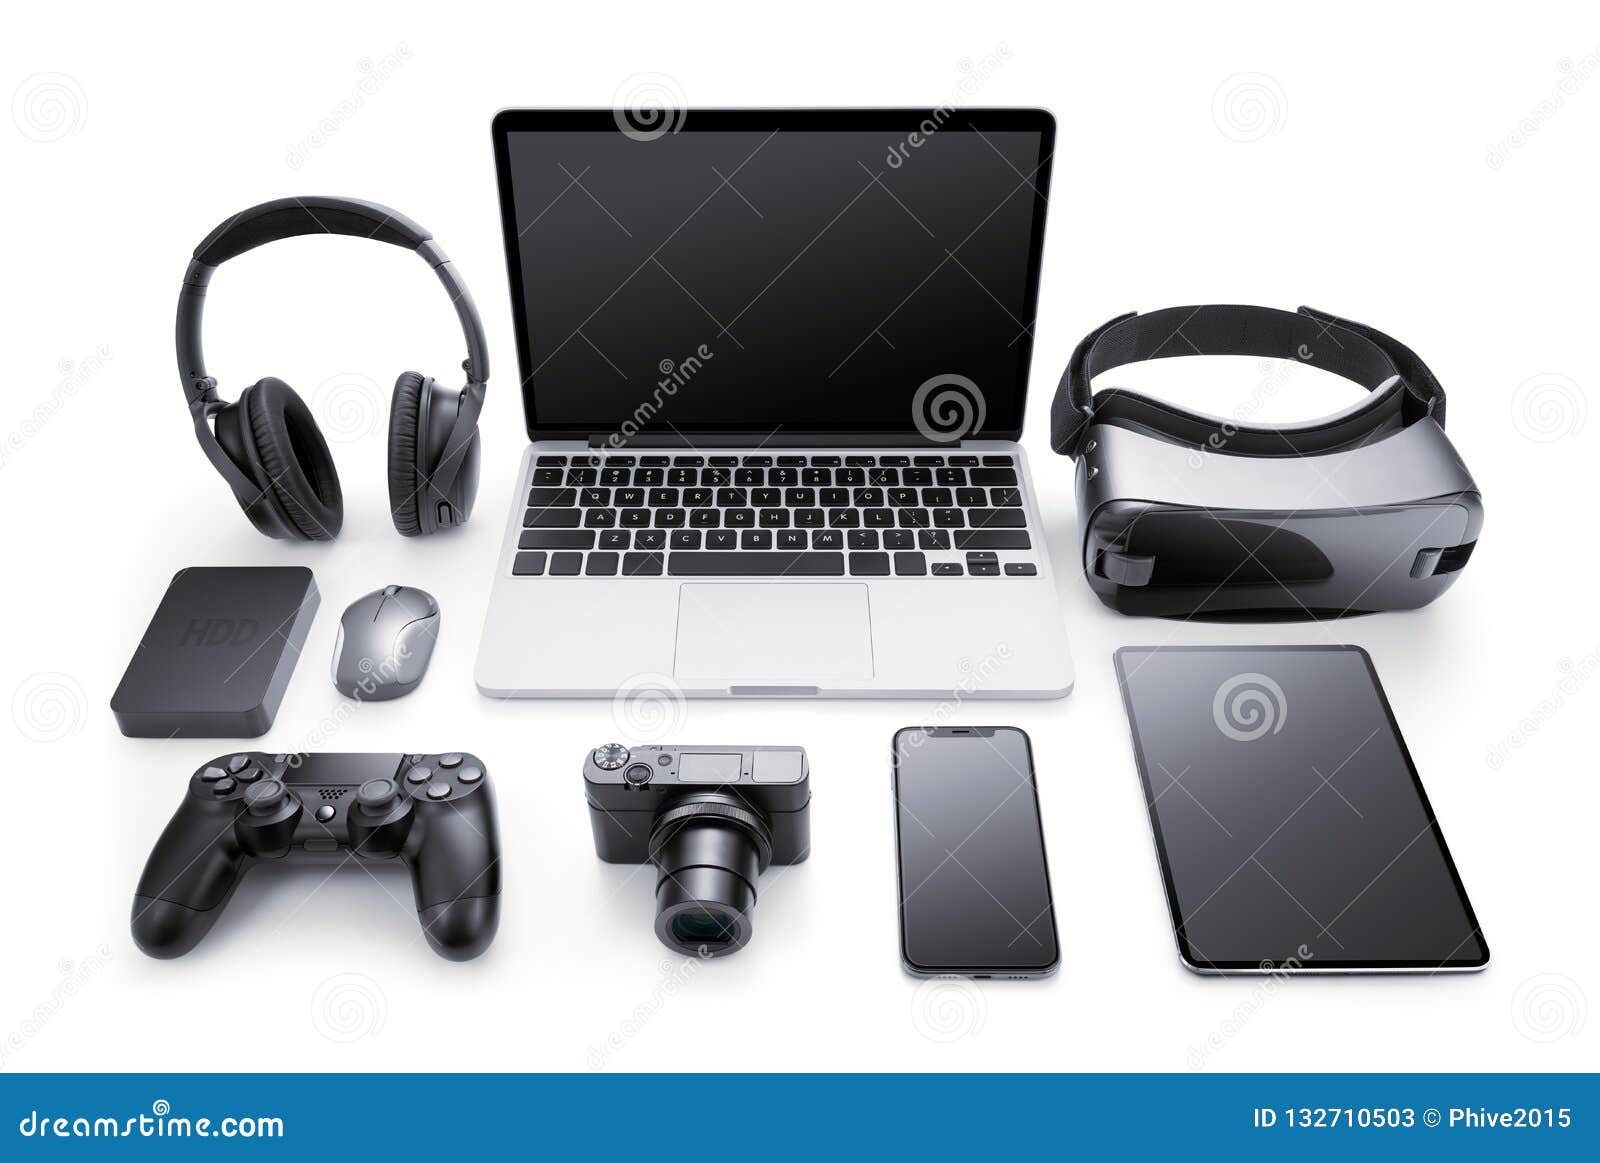 gadgets and accessories